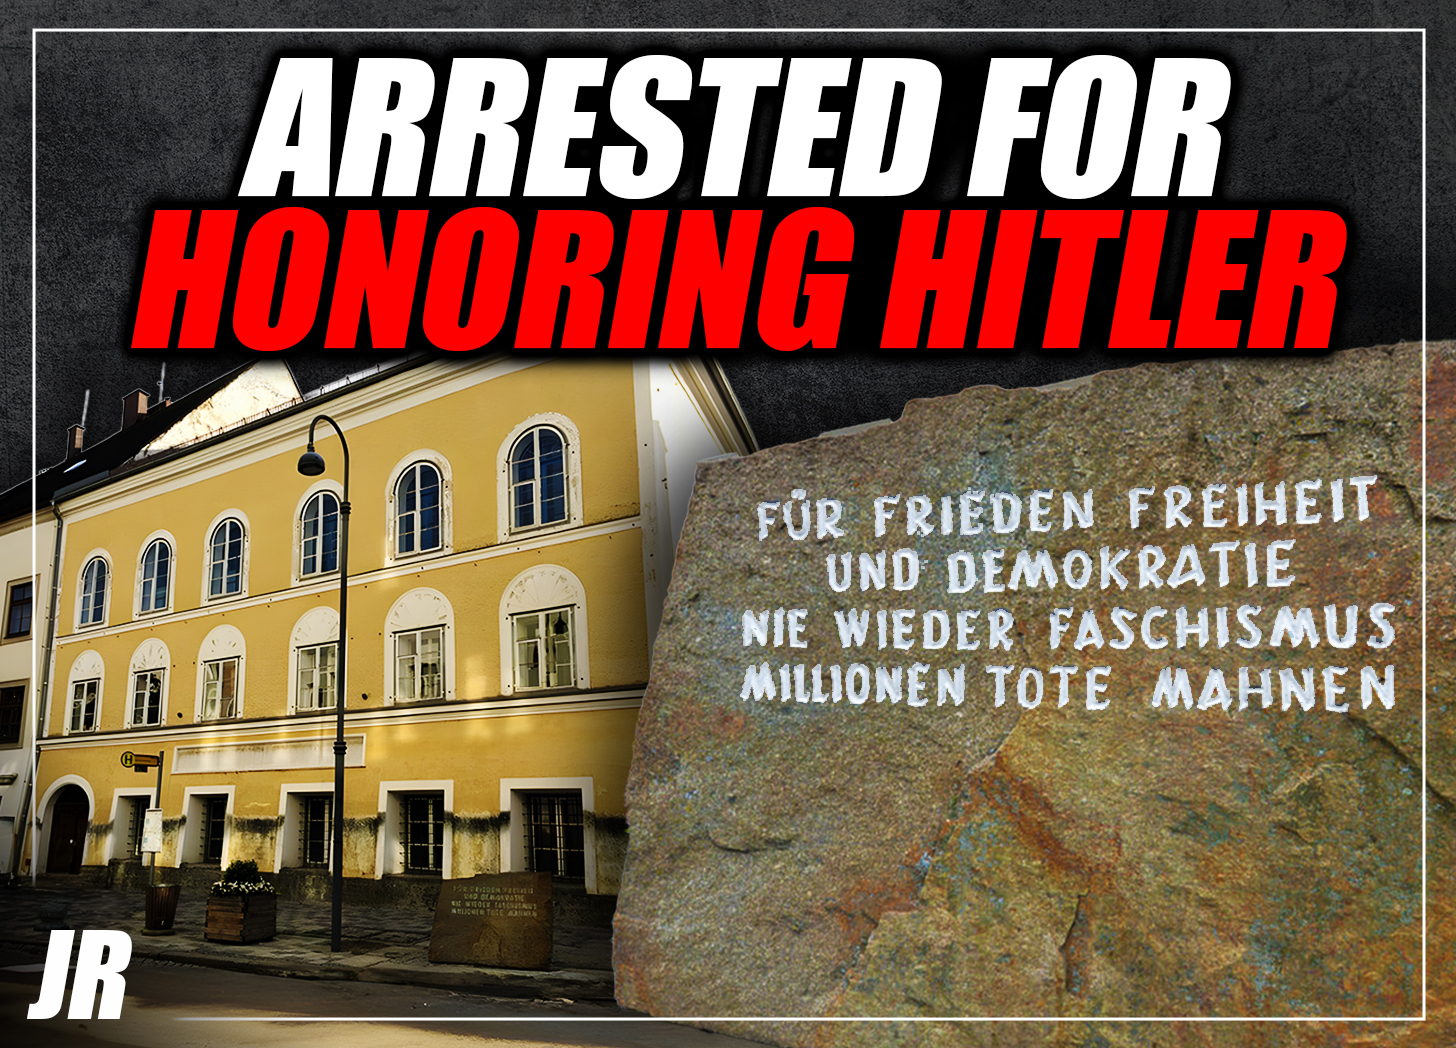 Four Germans arrested for ‘leaving flowers’ at Adolf Hitler’s birthplace